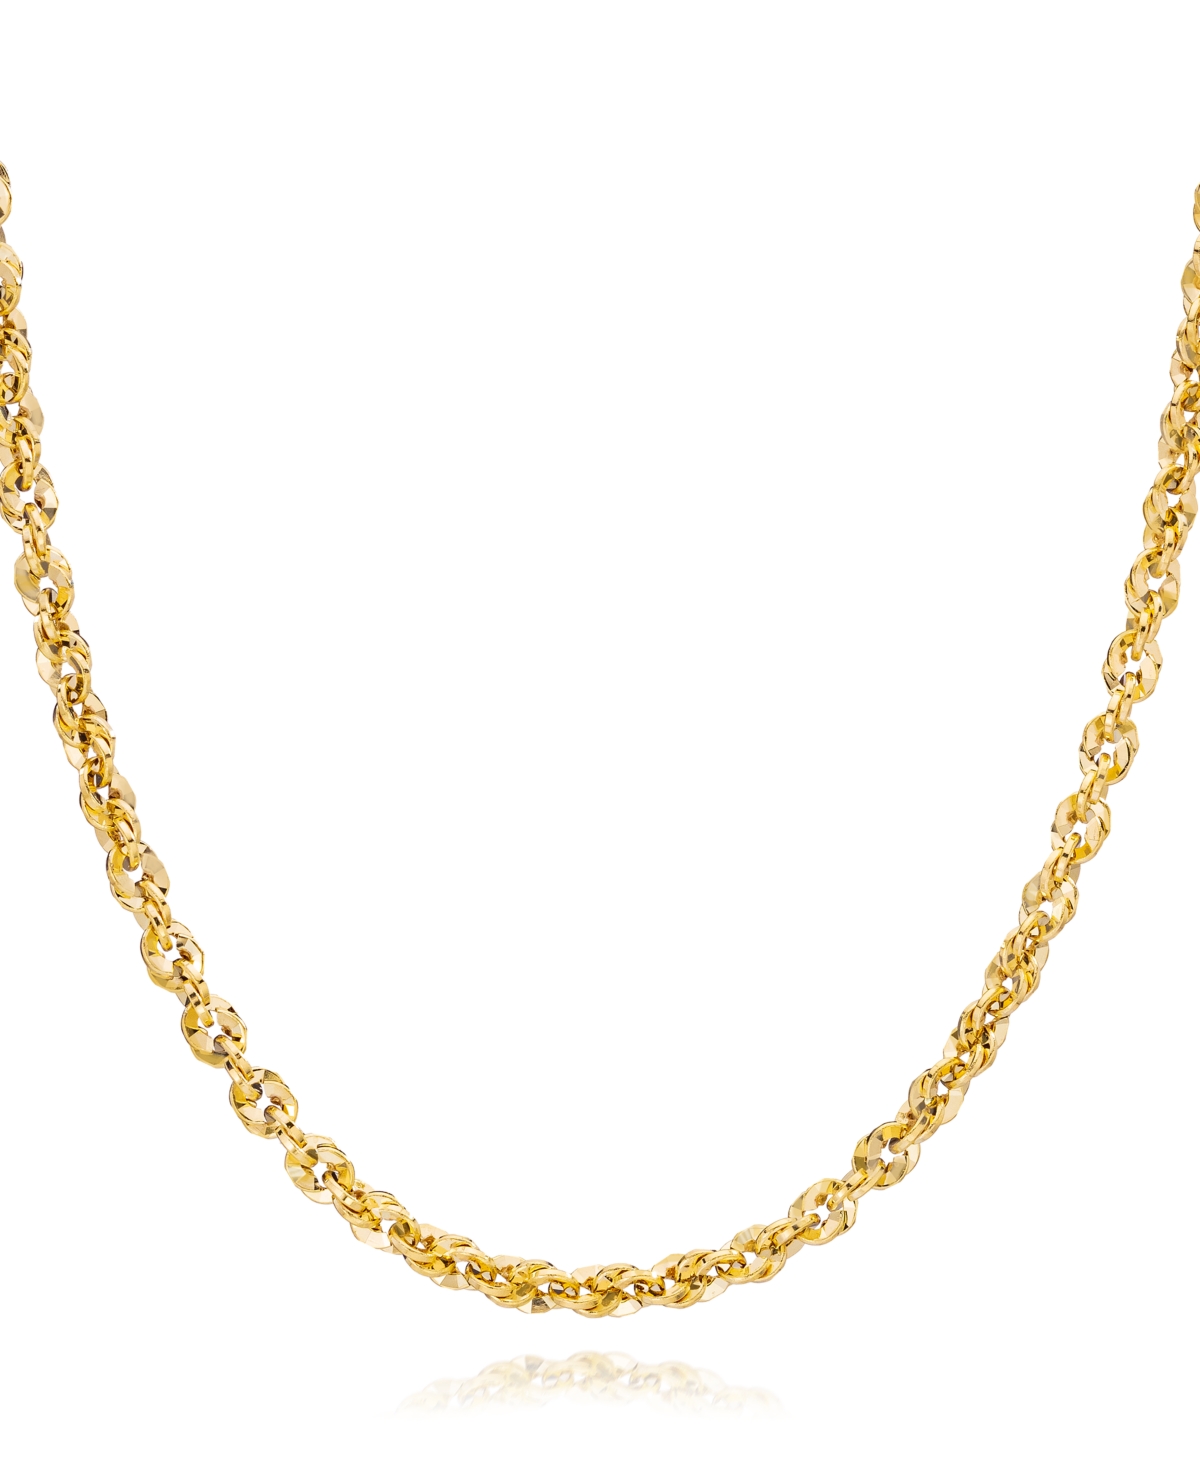 Diamond Cut Rope, 22" Chain Necklace (3-3/4mm) in 14k Gold, Made in Italy - Yellow Gold